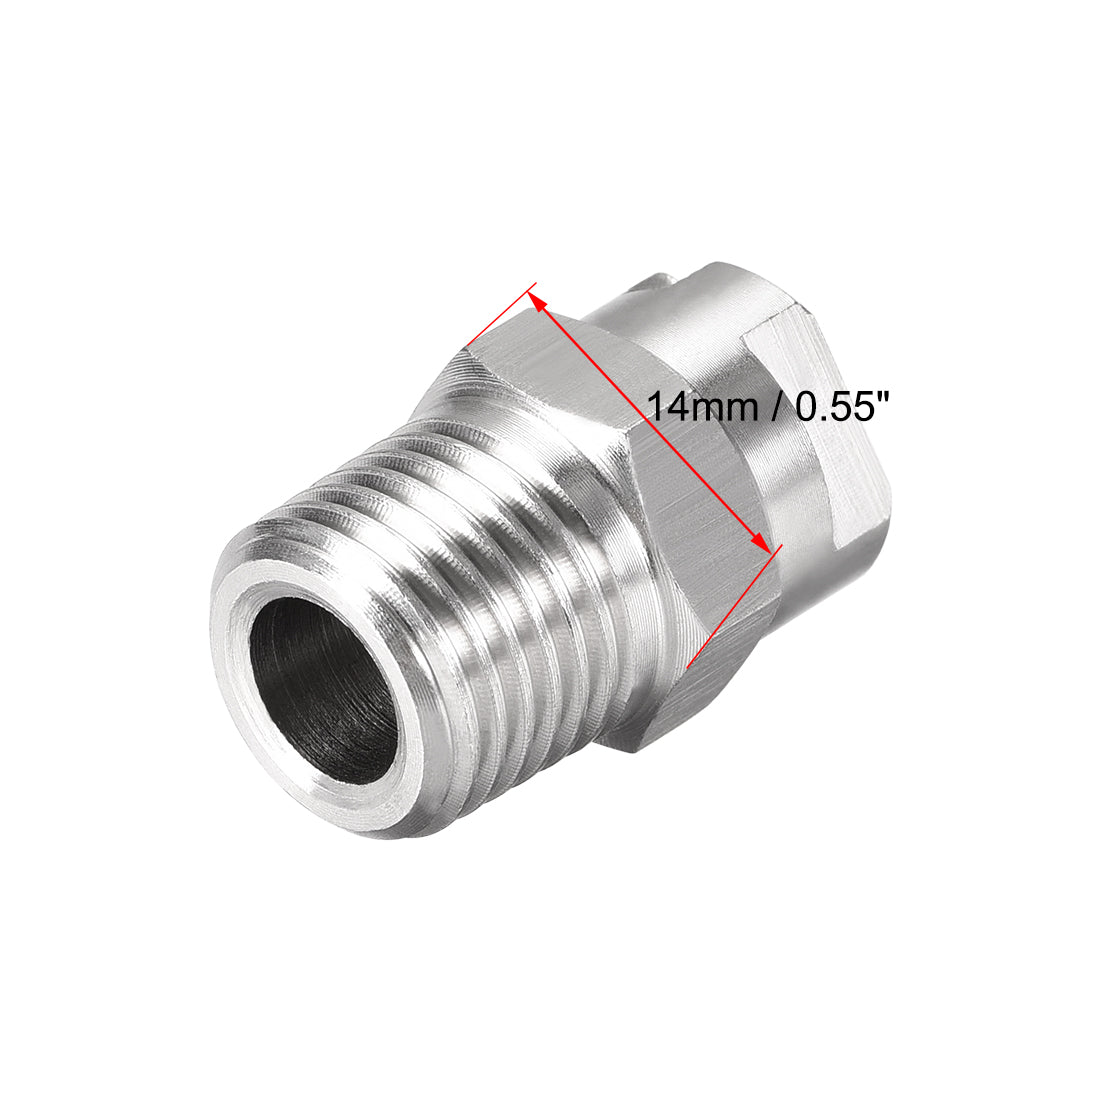 Uxcell Uxcell Flat Fan Spray Tip - 1/4BSPT Male Thread 304 Stainless Steel Nozzle - 65 Degree 2.4mm Orifice Diameter - 2 Pcs